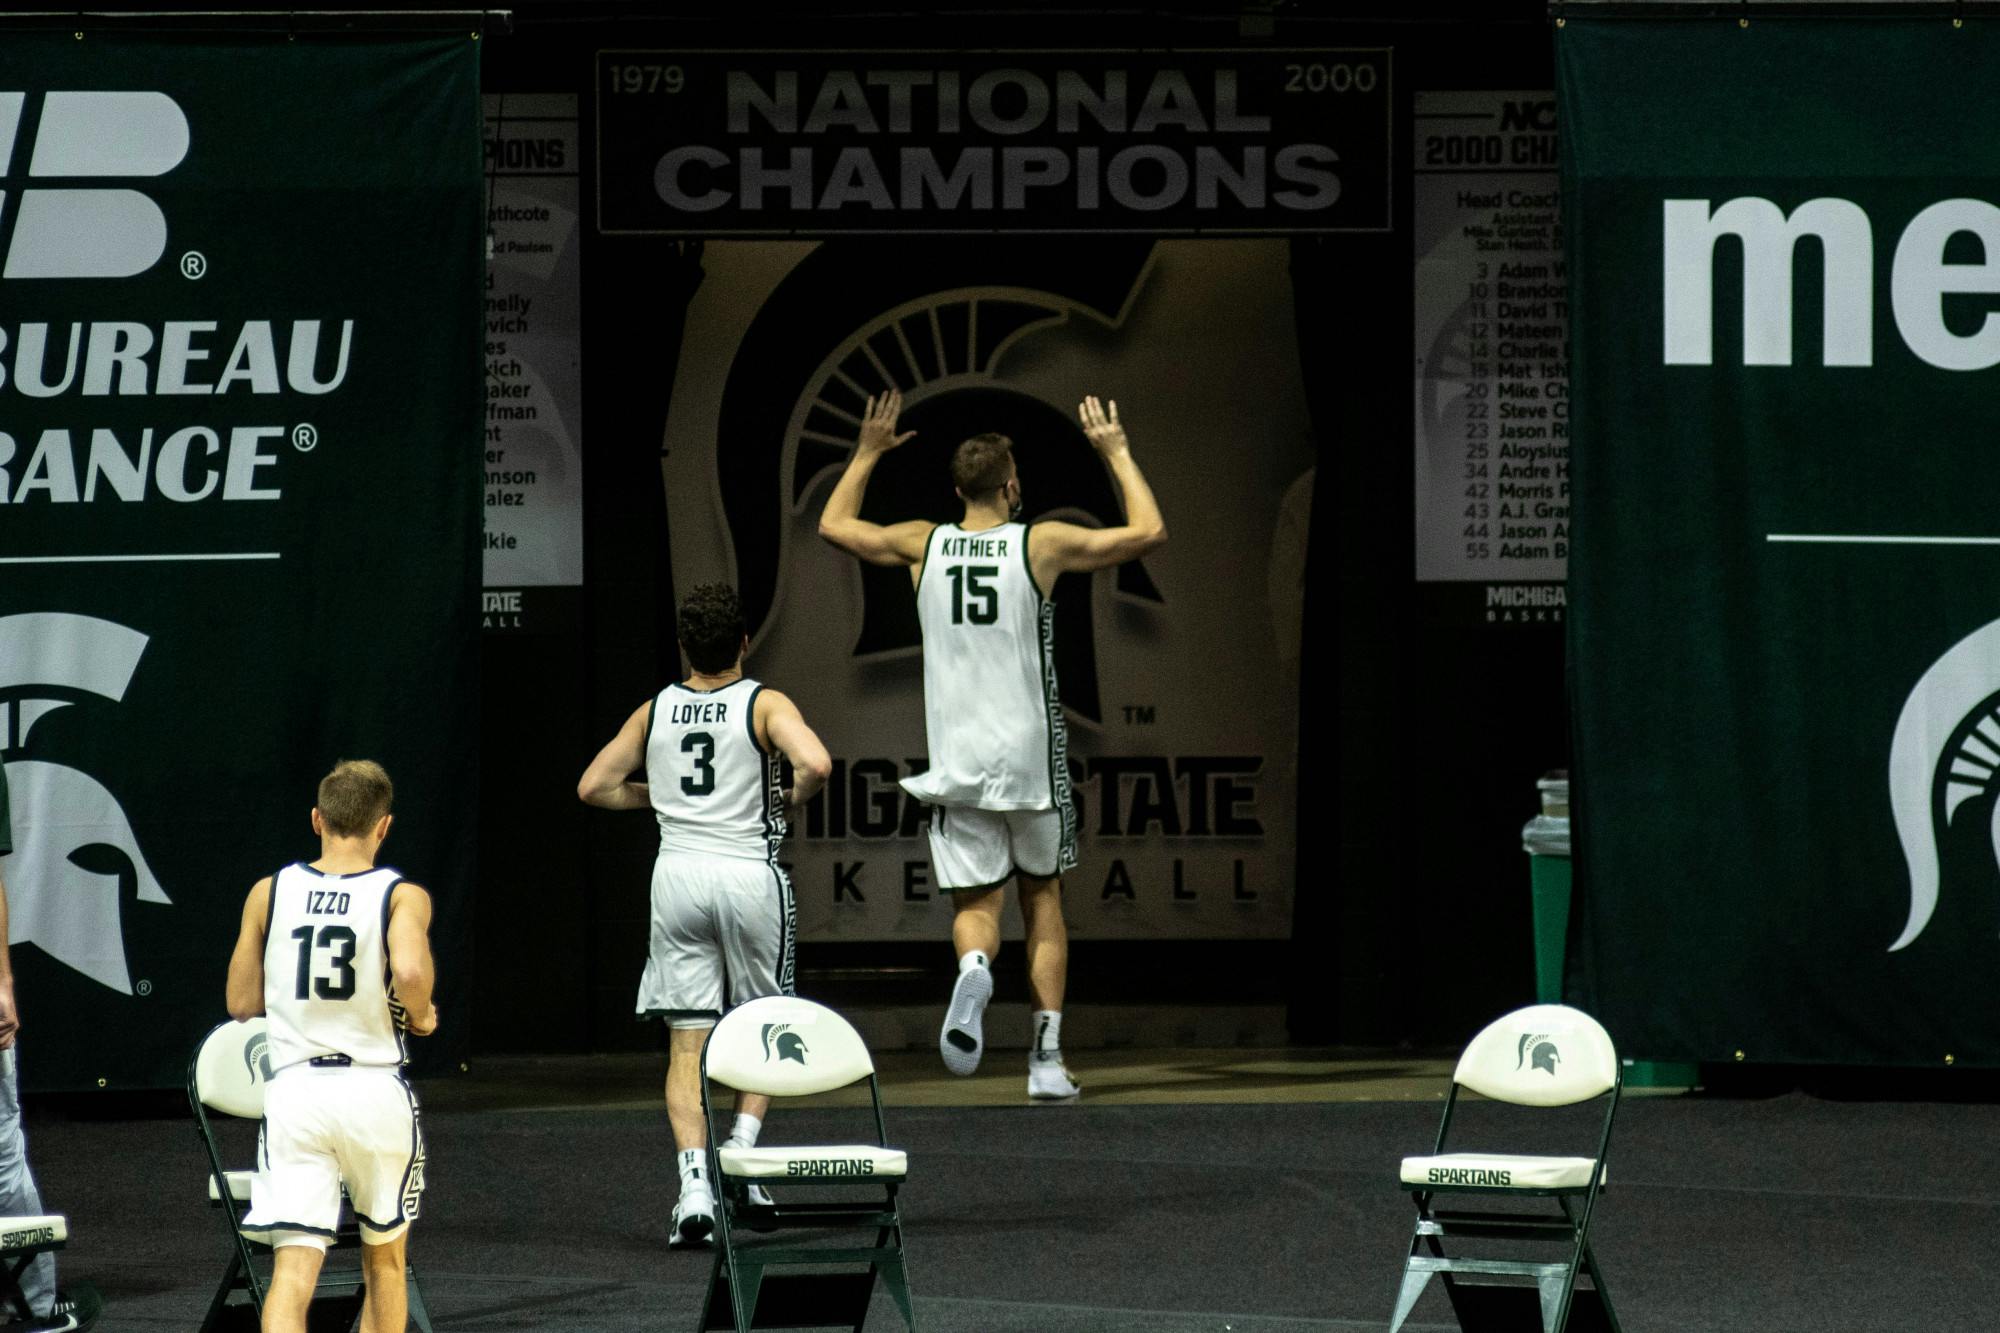 The Spartans run off the court after winning  the game against Eastern Michigan on Nov. 25, 2020 at the Breslin Center. The Spartans defeated the Eagles, 83-67.